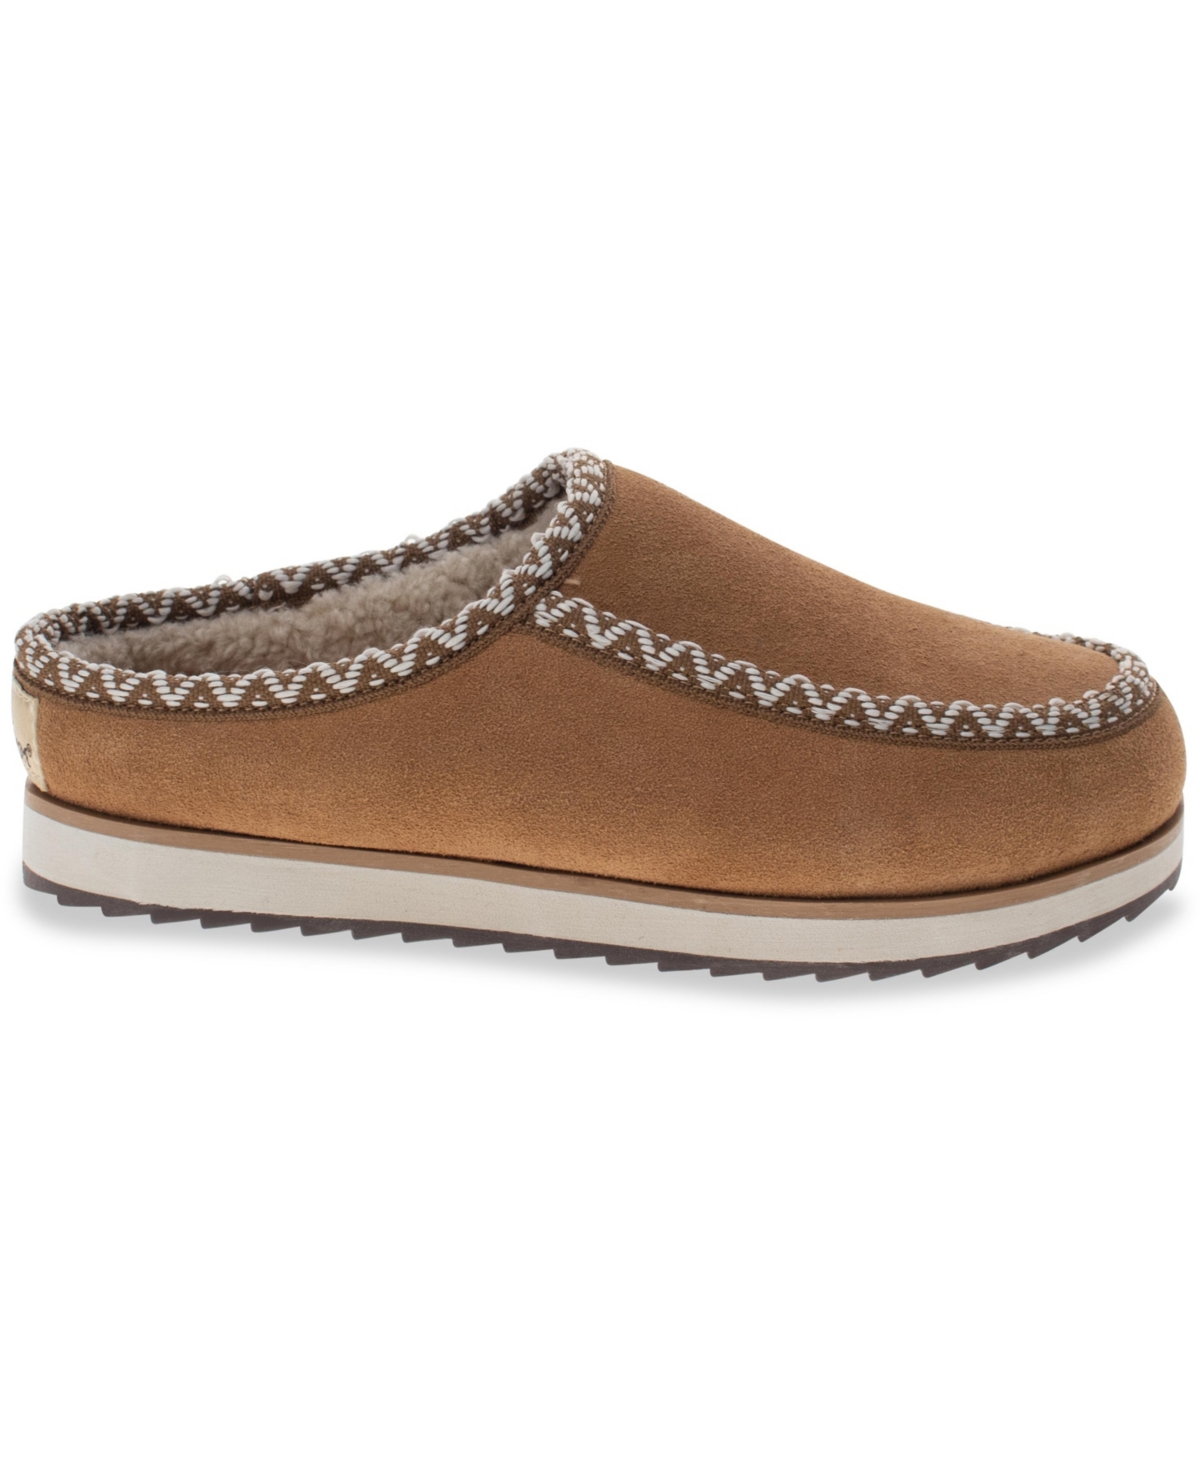 Women's Coulee Clog Slipper - Wheat